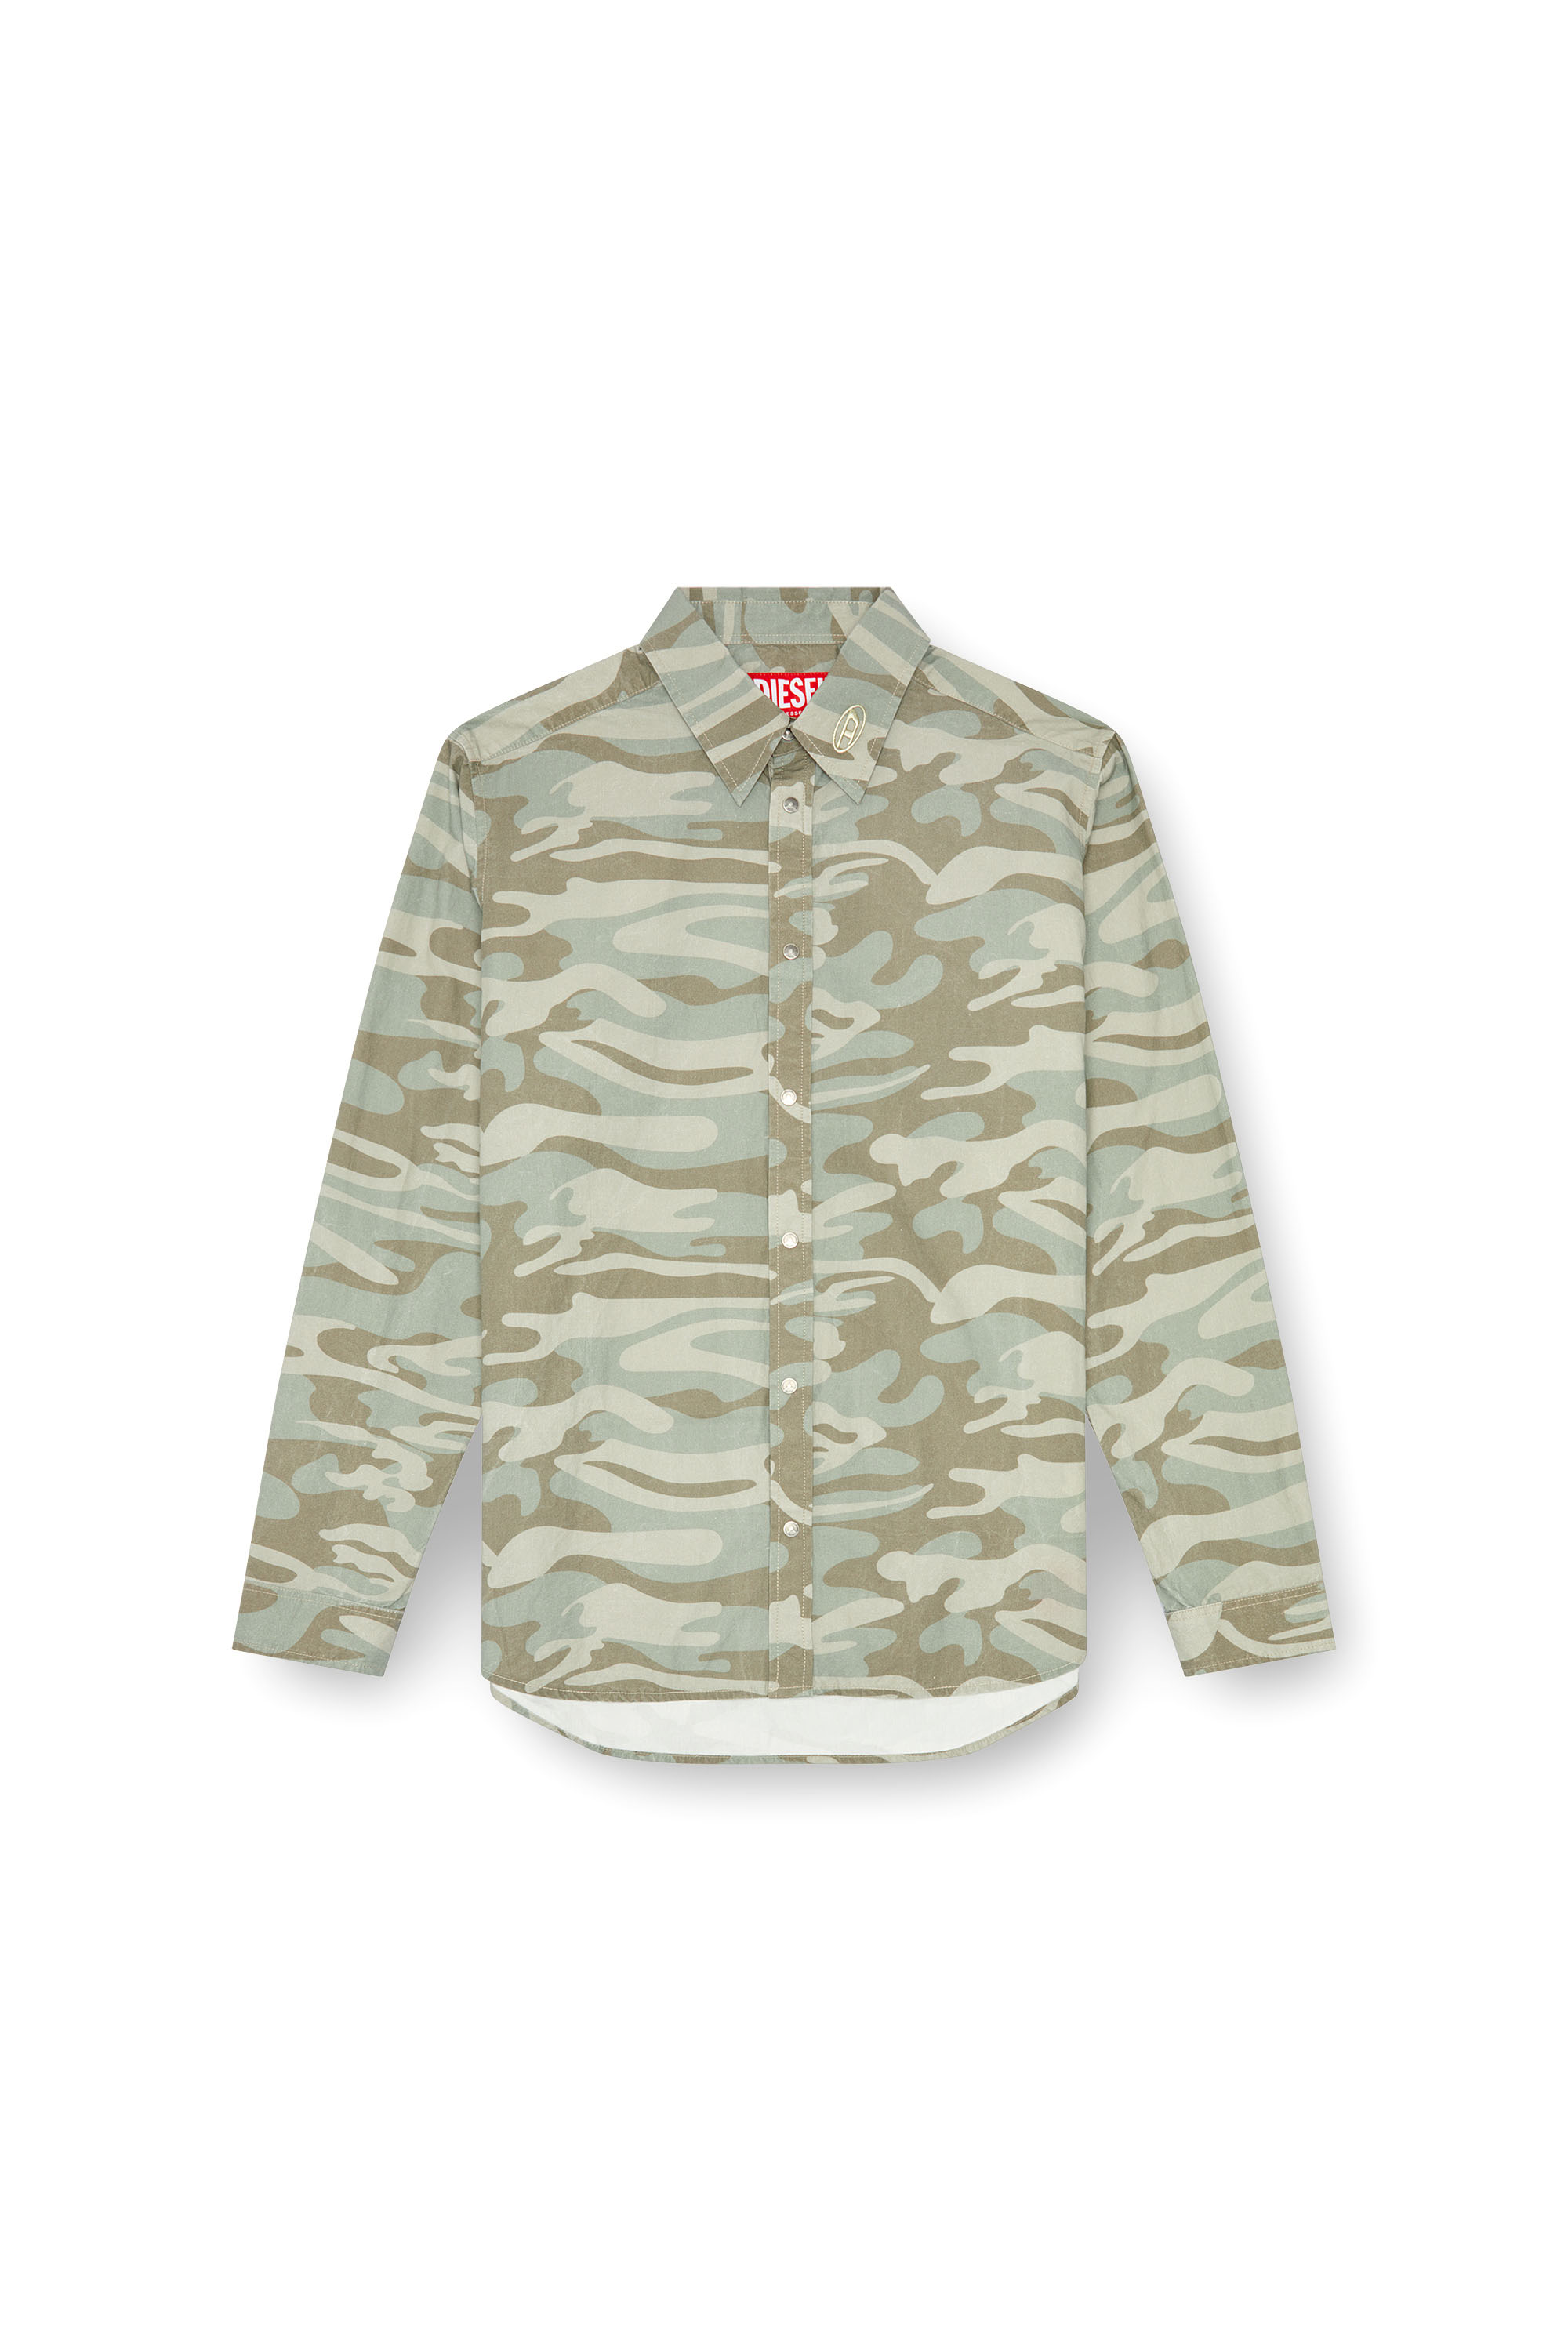 Diesel - S-HOLTE, Uomo Camicia in popeline con stampa camouflage in Verde - Image 3